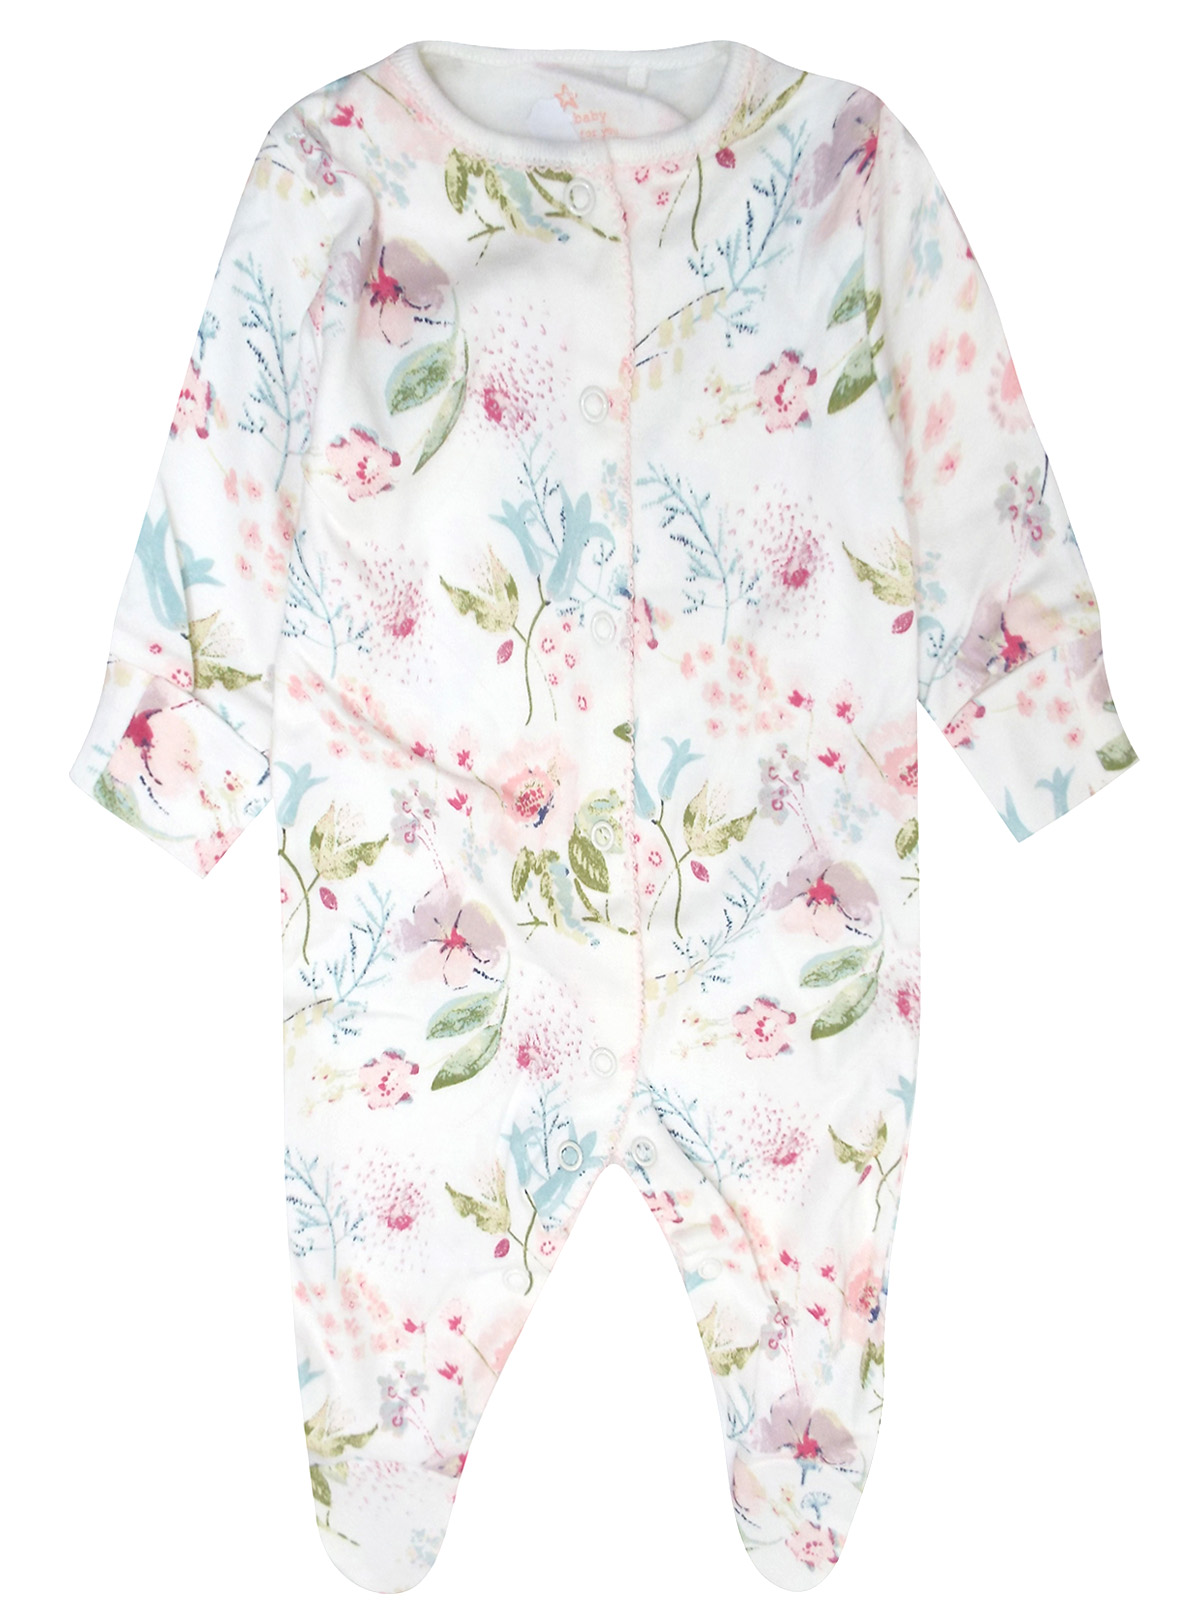 N3XT WHITE Baby Girls Pure Cotton Floral Print Sleepsuit - Size First ...